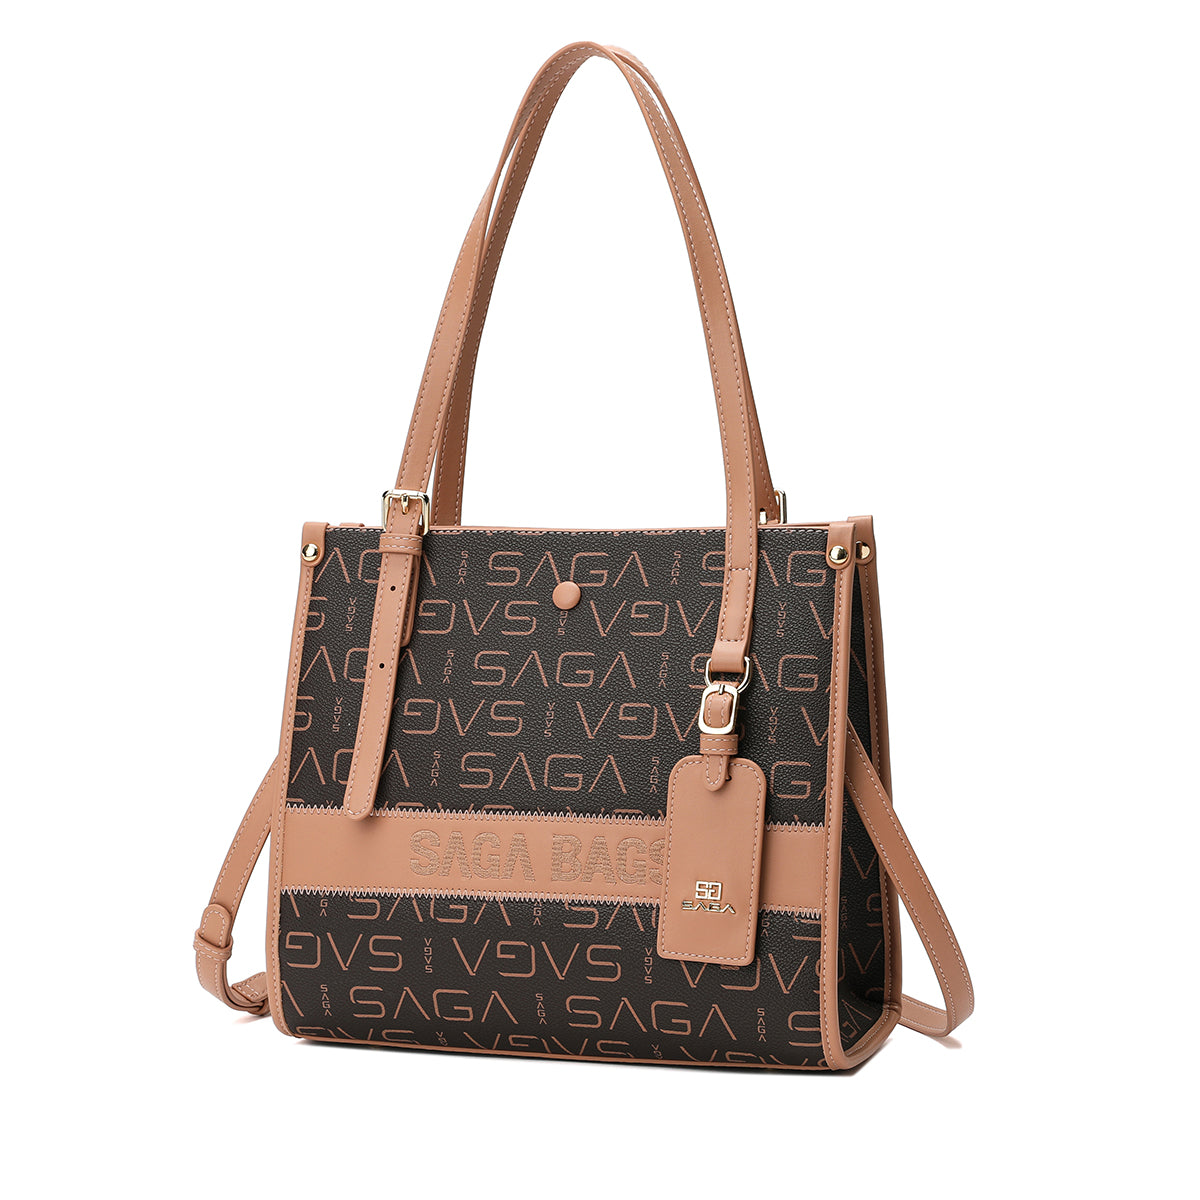 A handbag with a distinctive design with the Saga logo, 28.5 cm wide, in coffee or apple green color